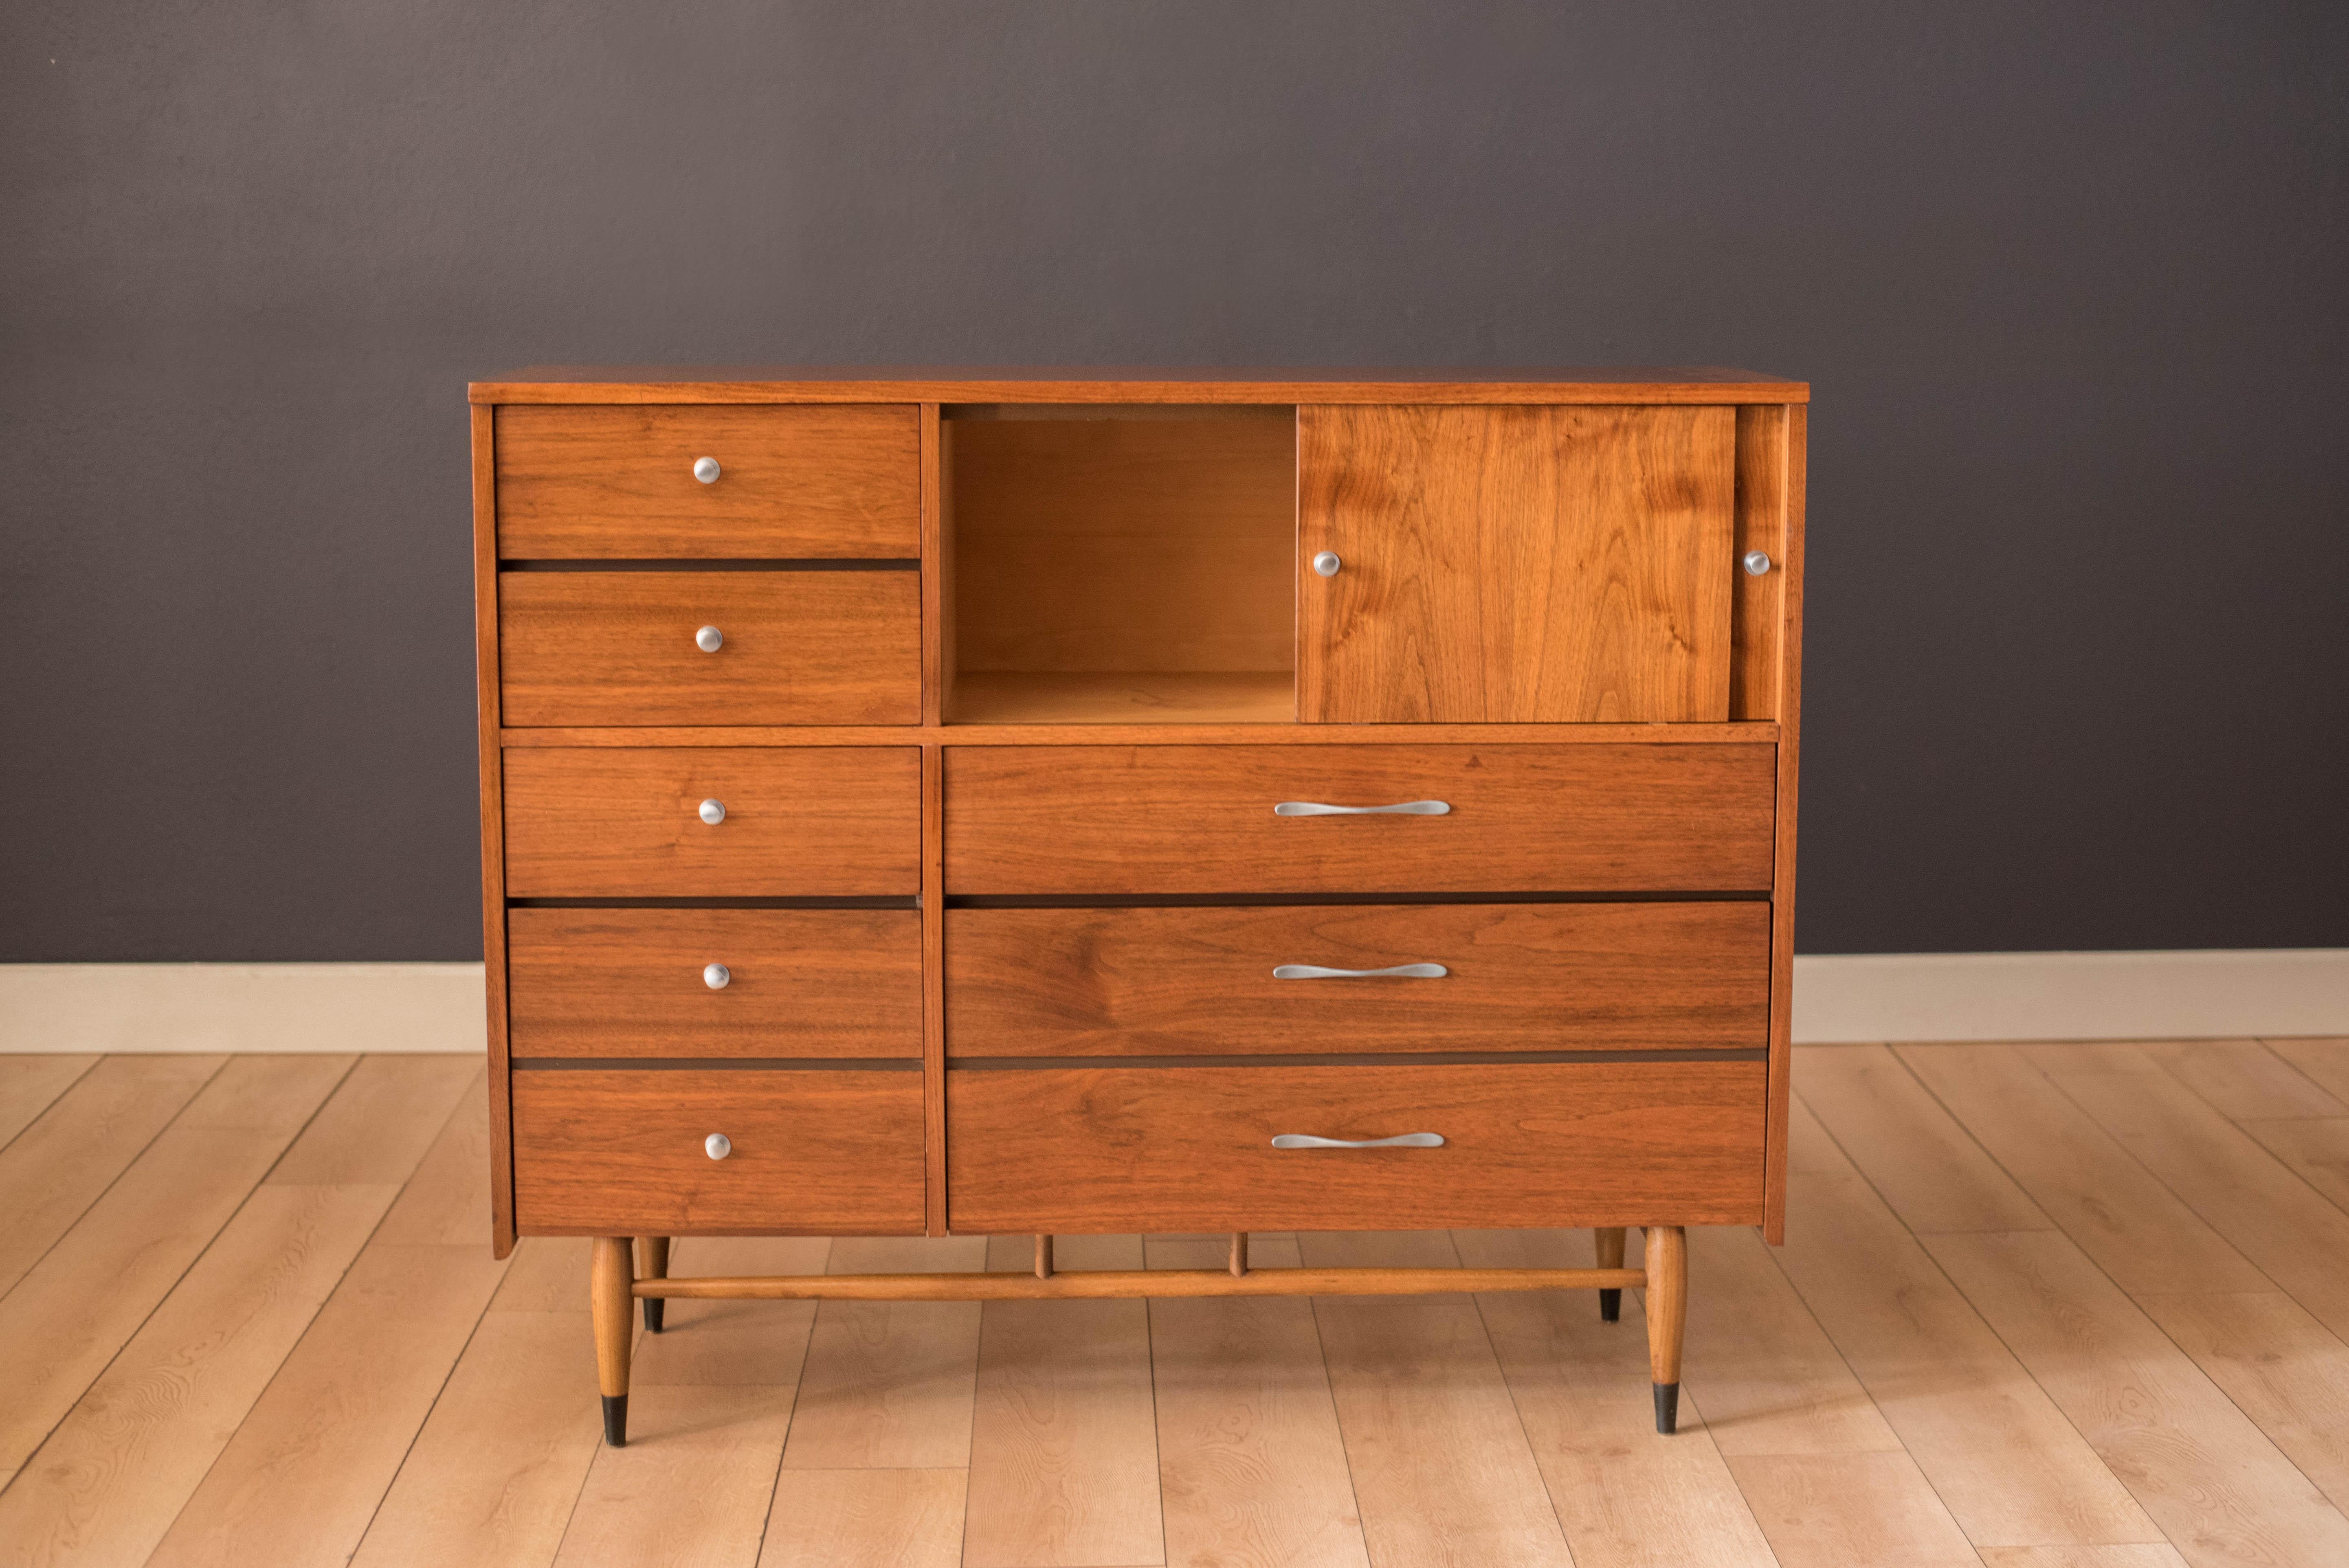 Vintage tall highboy dresser chest manufactured by Lane Furniture. This piece offers plenty of storage that includes six drawers and two organizing open compartment spaces with sliding doors. Accented with polished aluminum pulls and the Acclaim